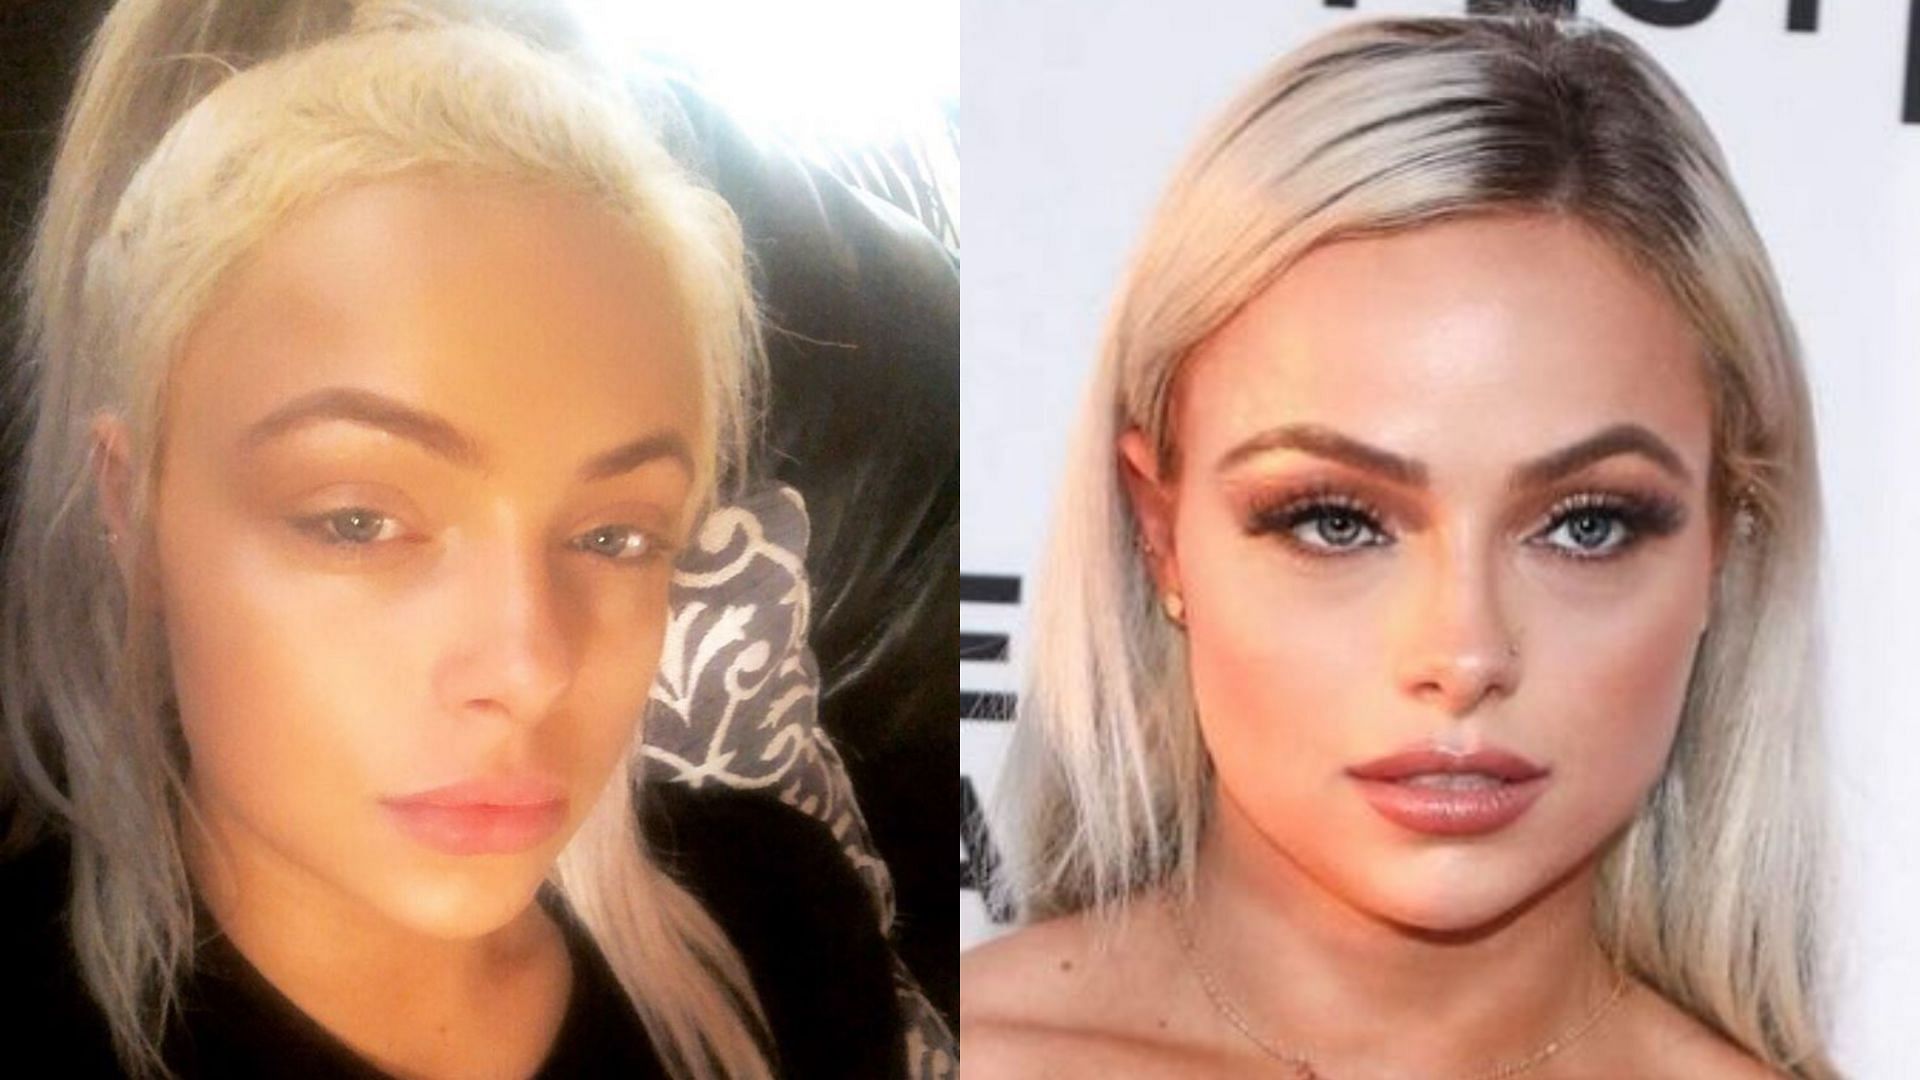 Liv Morgan without makeup (left) and with makeup (right)